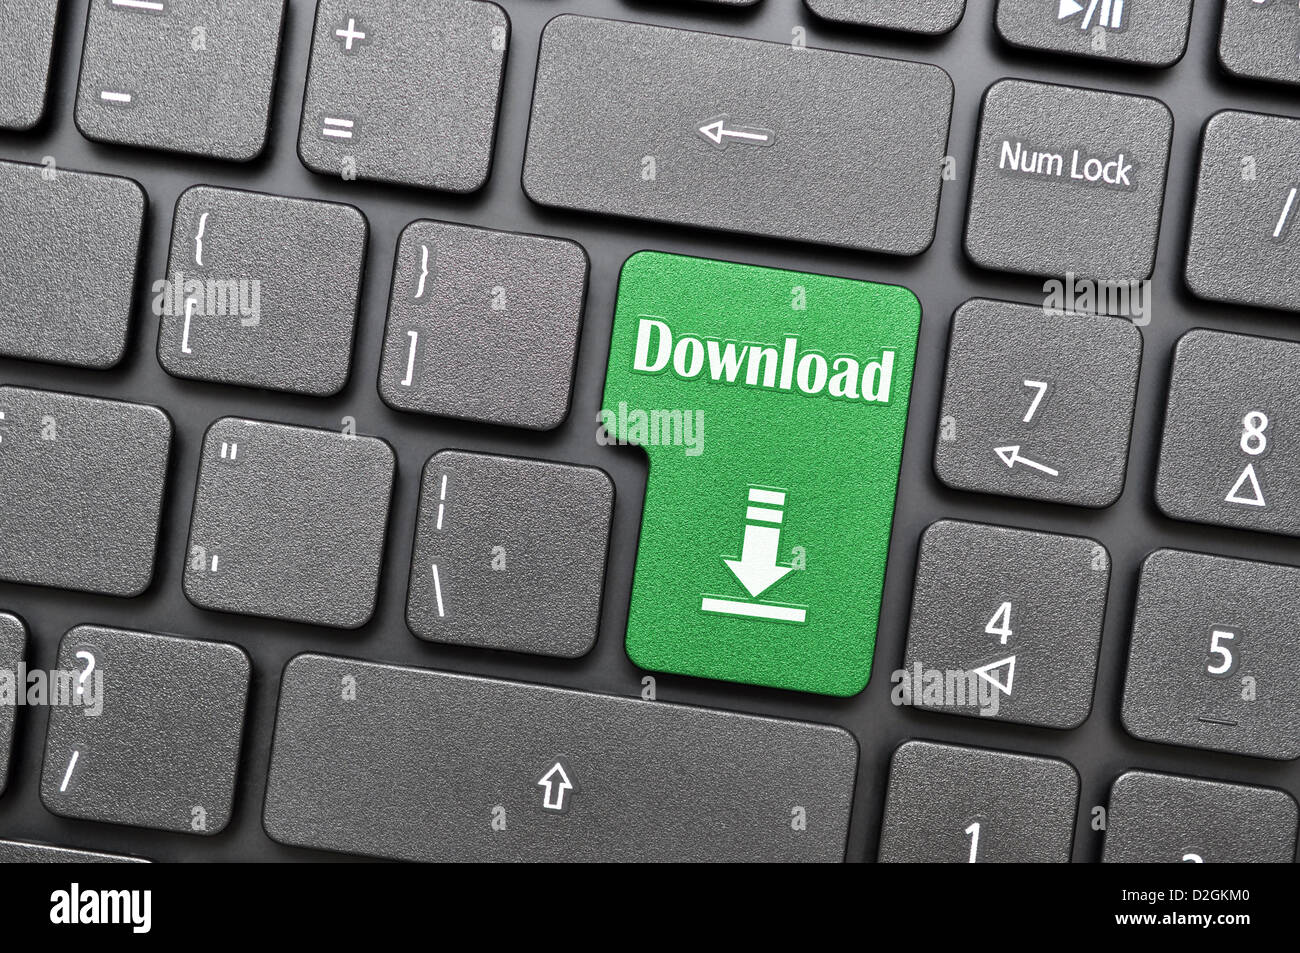 Download on keyboard Stock Photo